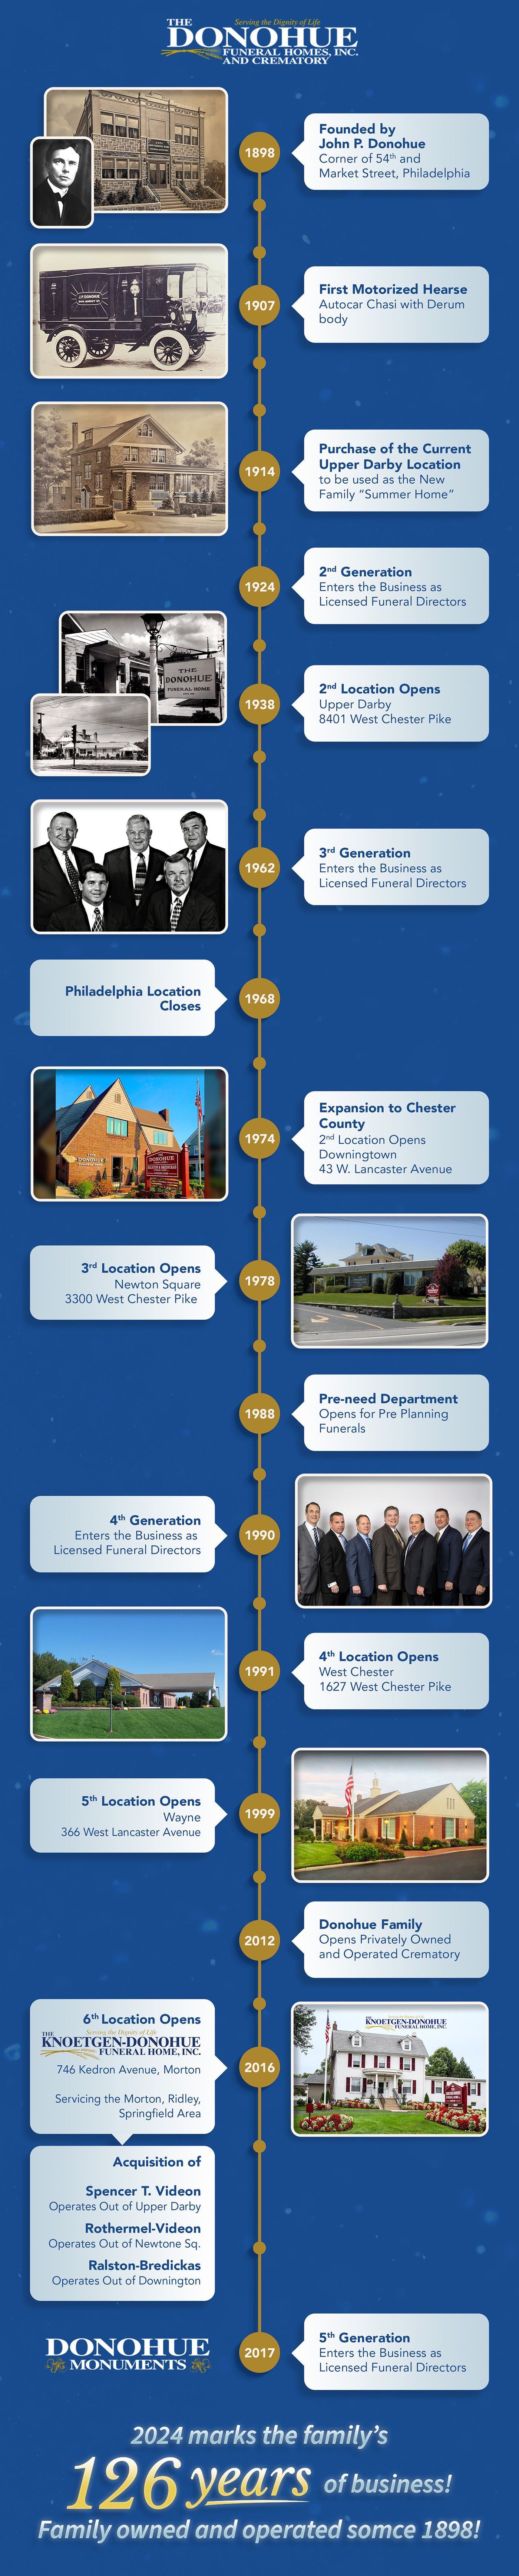 Donohue Funeral Home - Timeline